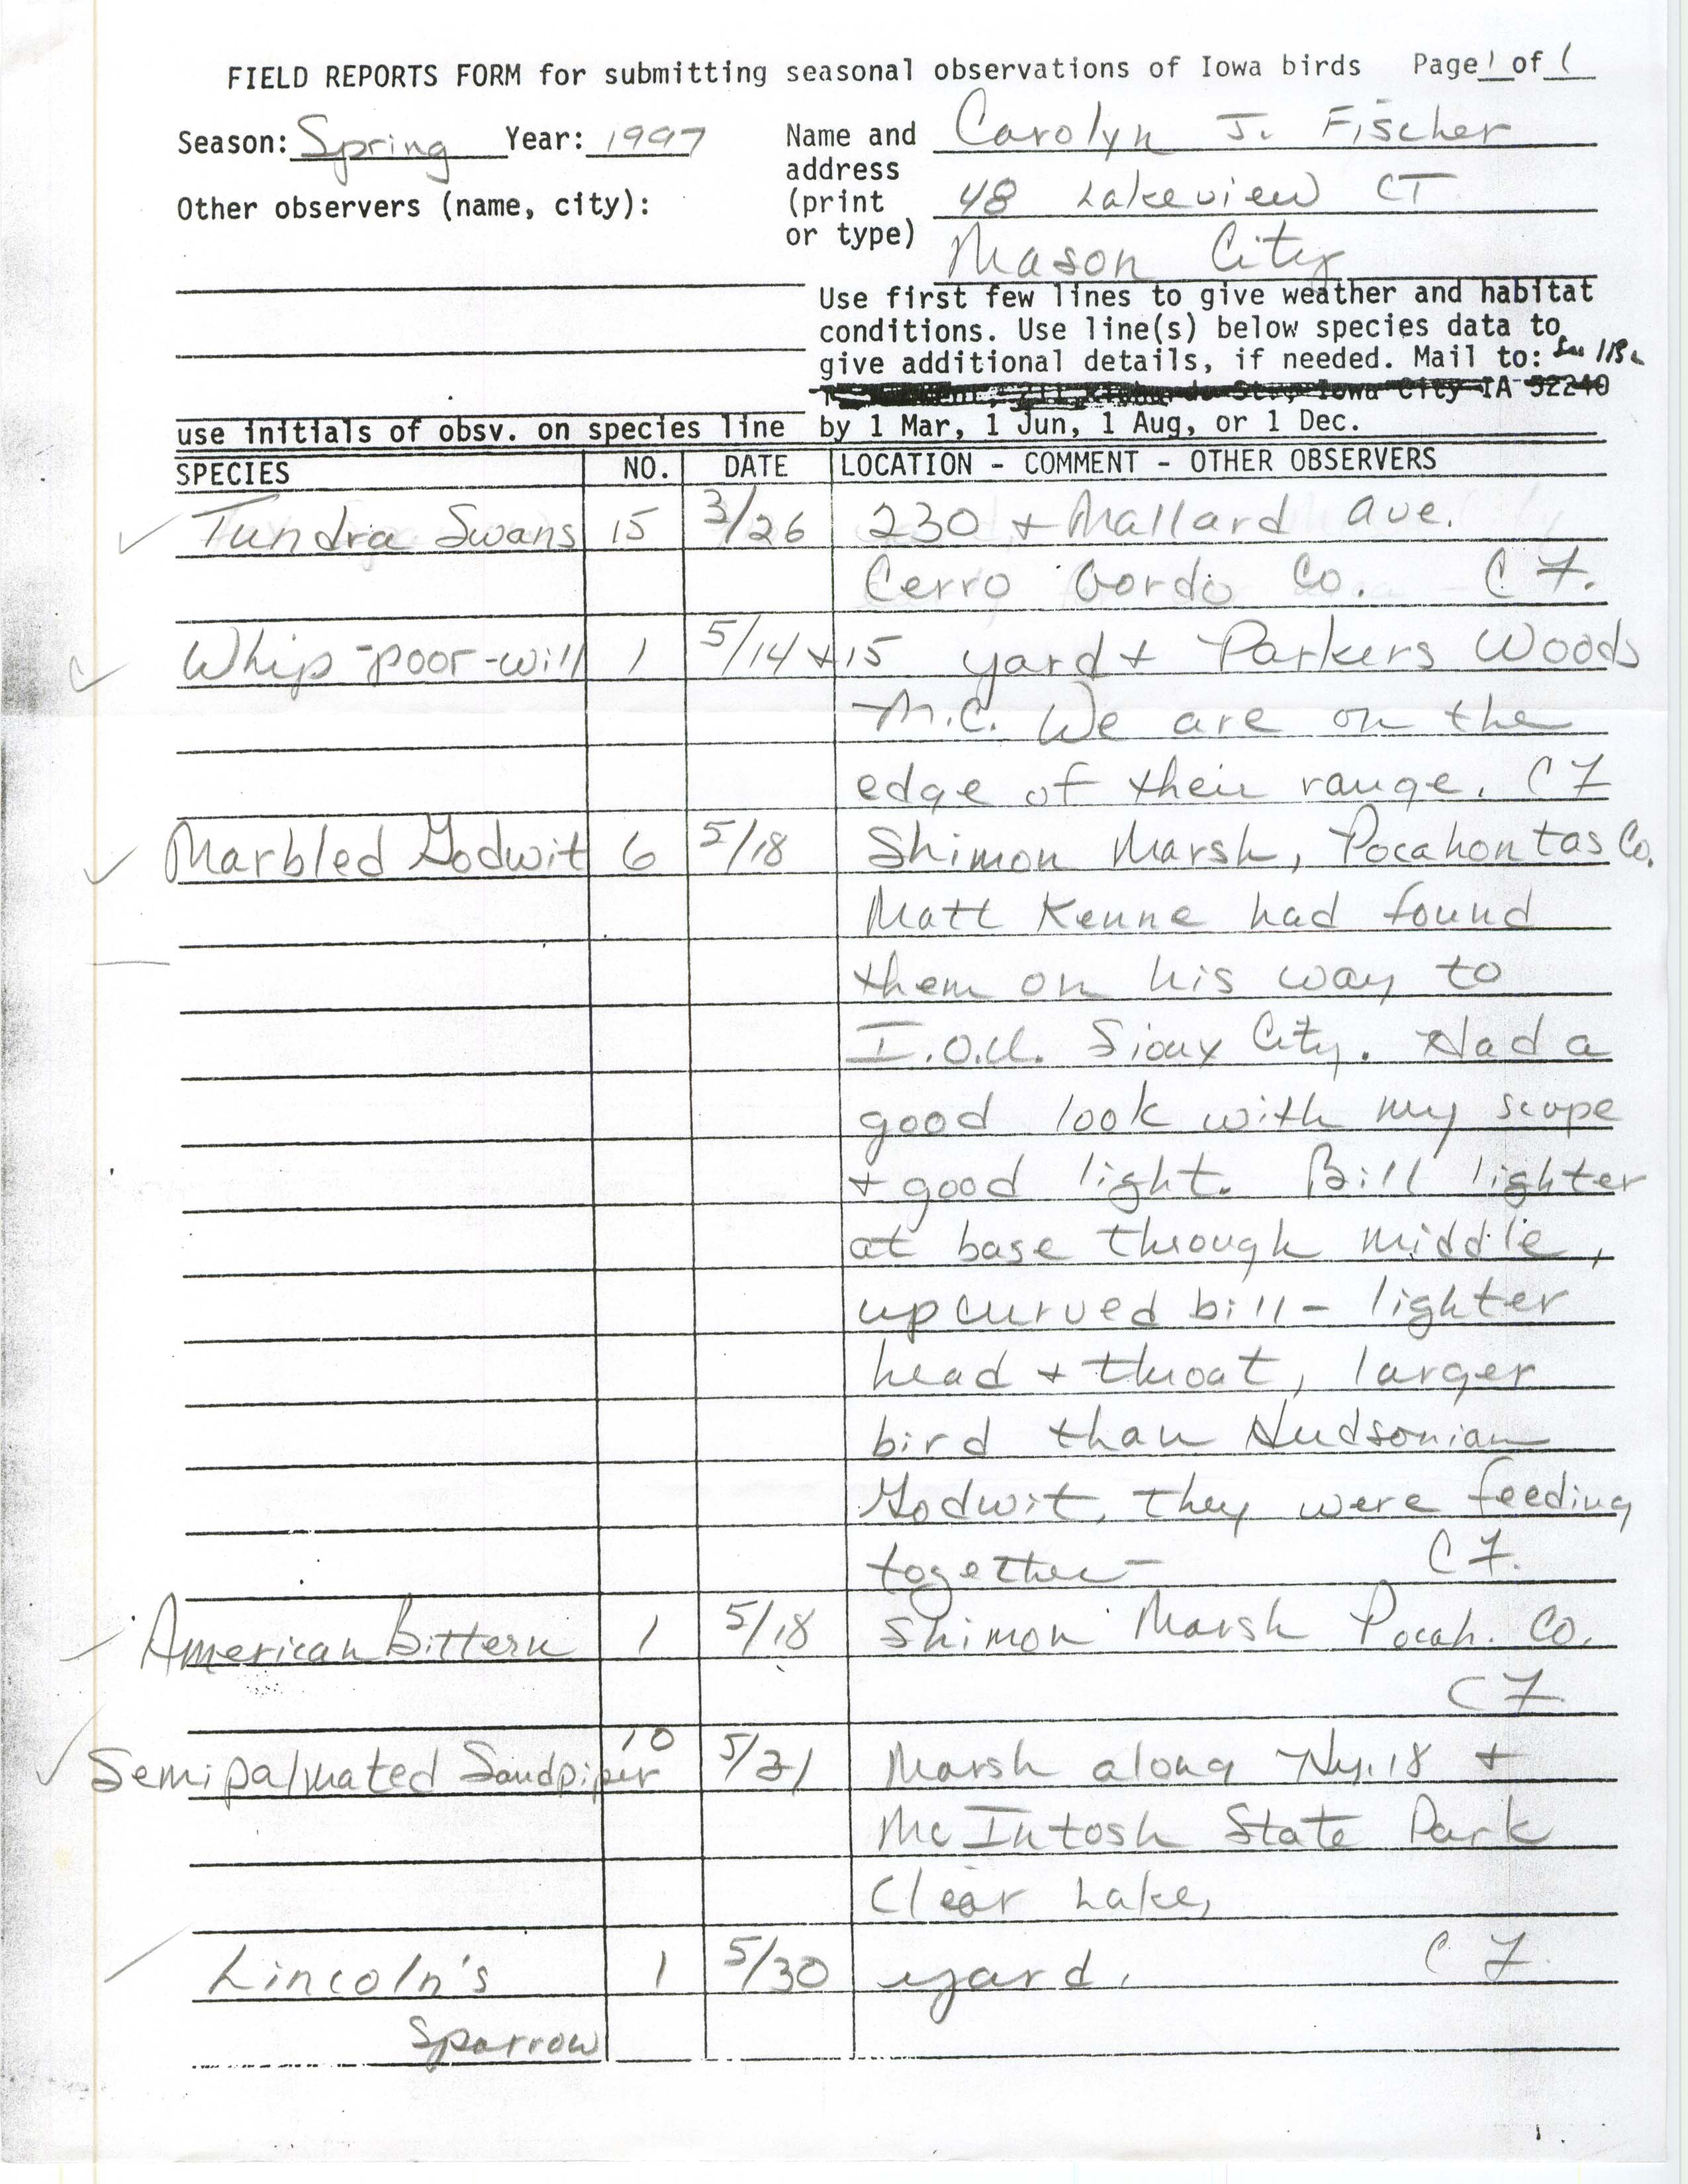 Field reports form for submitting seasonal observations of Iowa birds, Carolyn J. Fischer, spring 1997